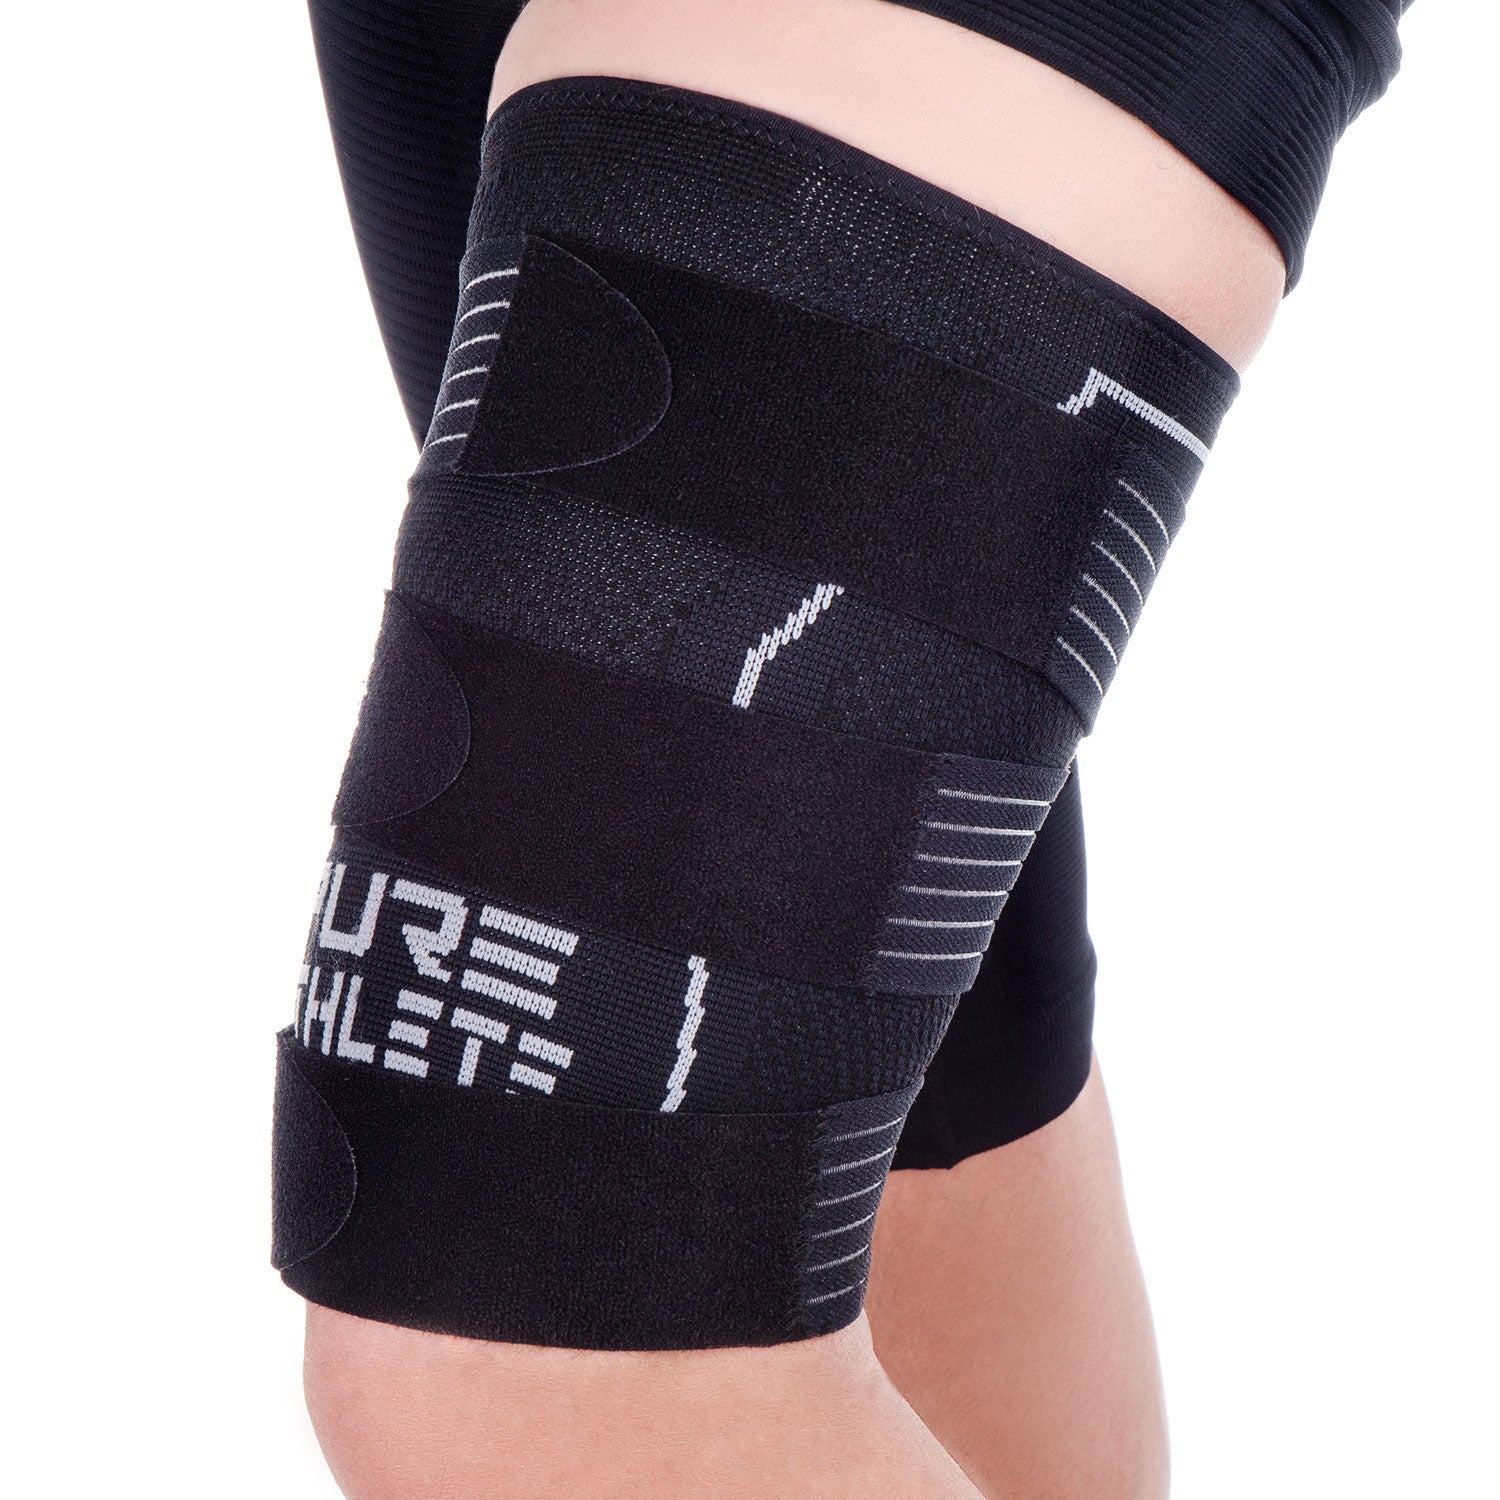 1Pc Upper Thigh Compression Sleeve,Hamstring Compression Sleeve Supports  Muscle Pain for Groin Pain,Quad Compression Sleeve - AliExpress